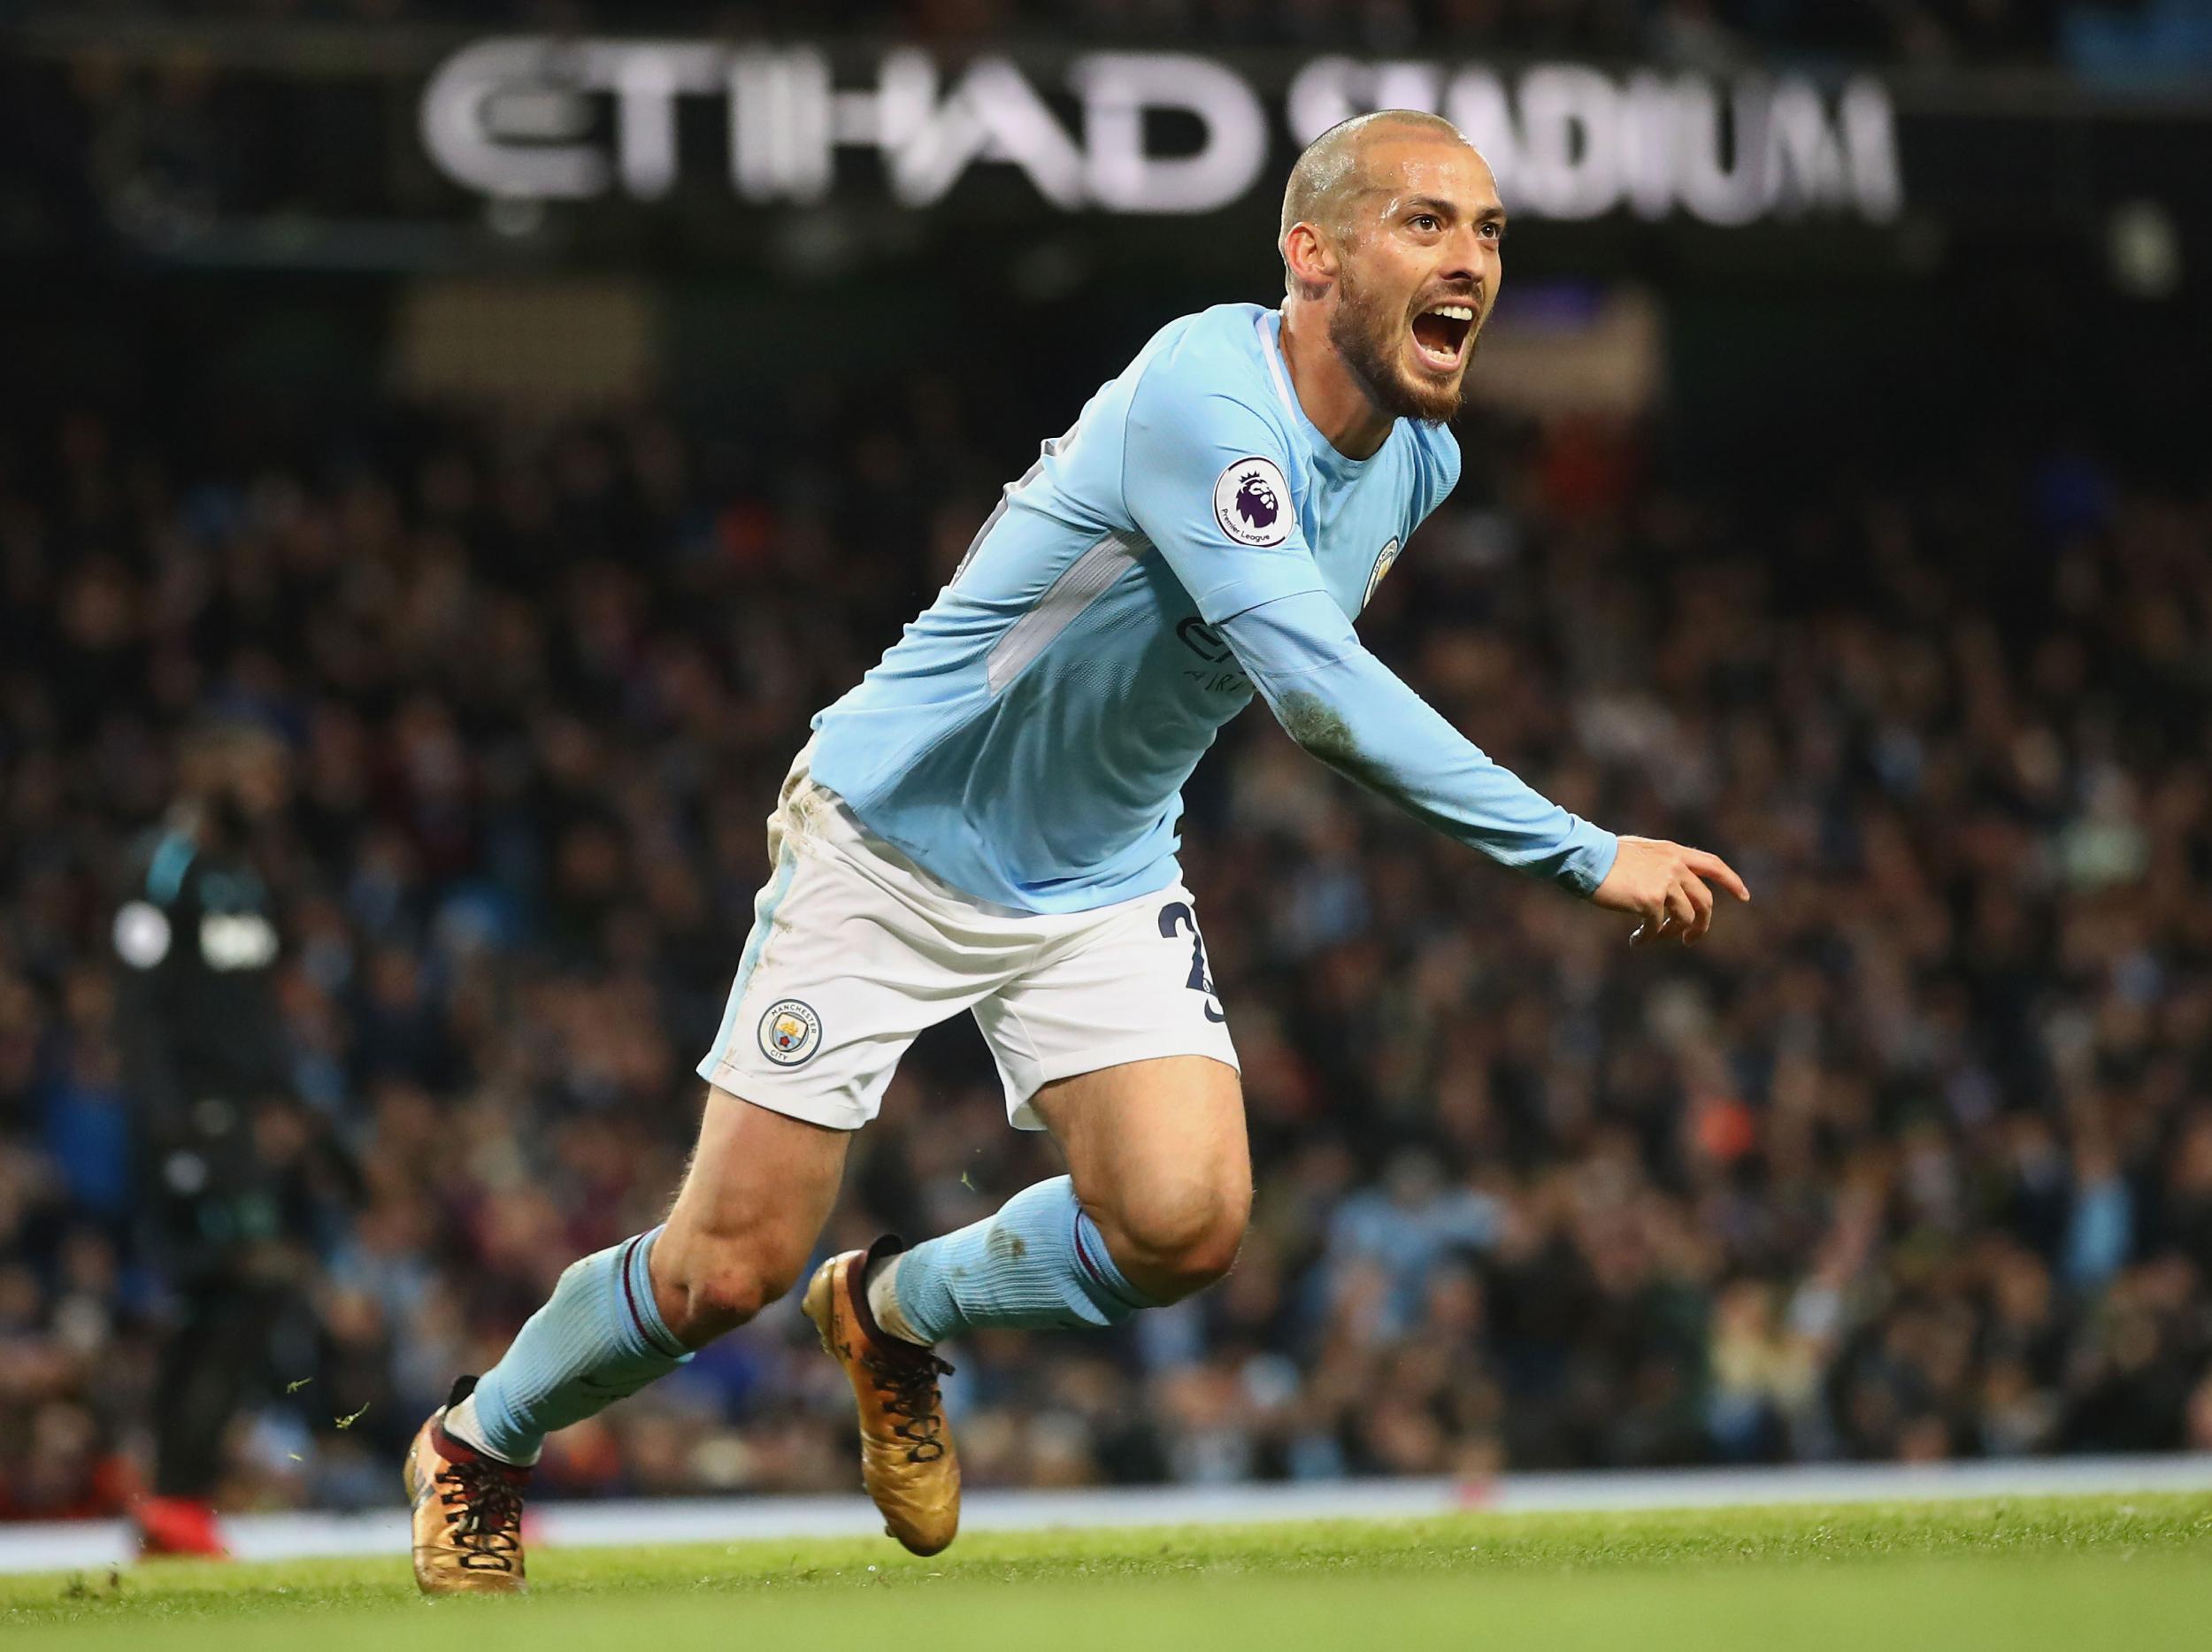 David Silva was Manchester City's hero scoring late to put them eight points clear at the top